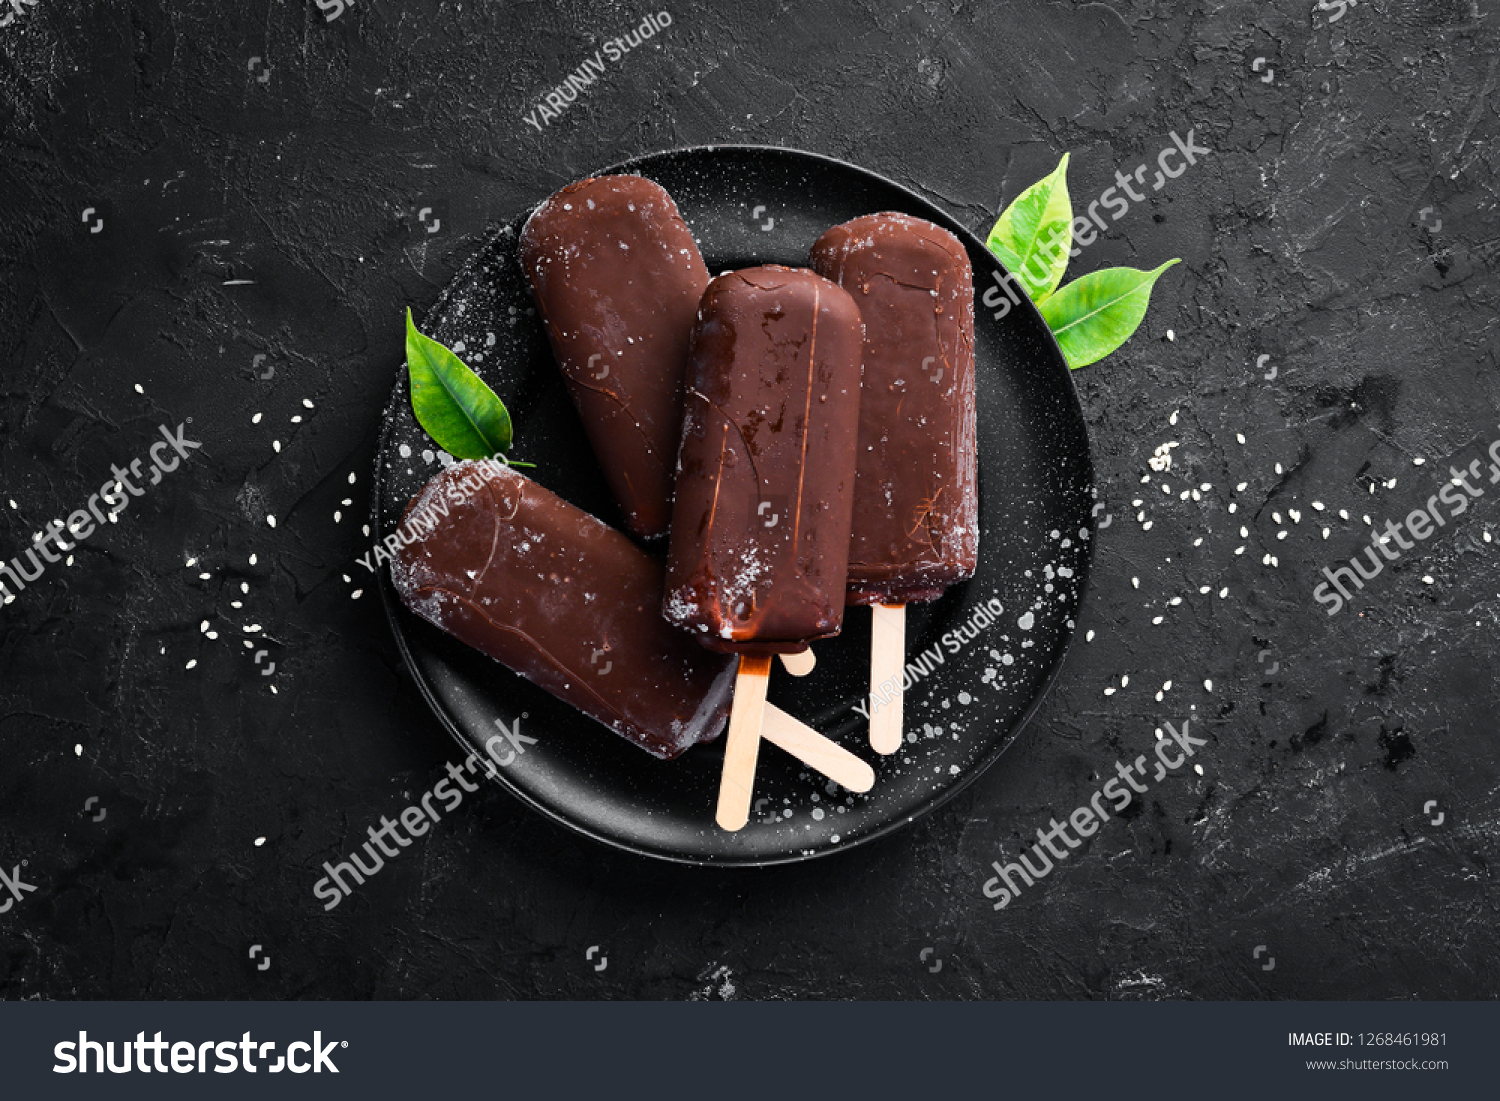 Chocolate ice cream on a stick. On a black background. Top view. Free copy space. #1268461981